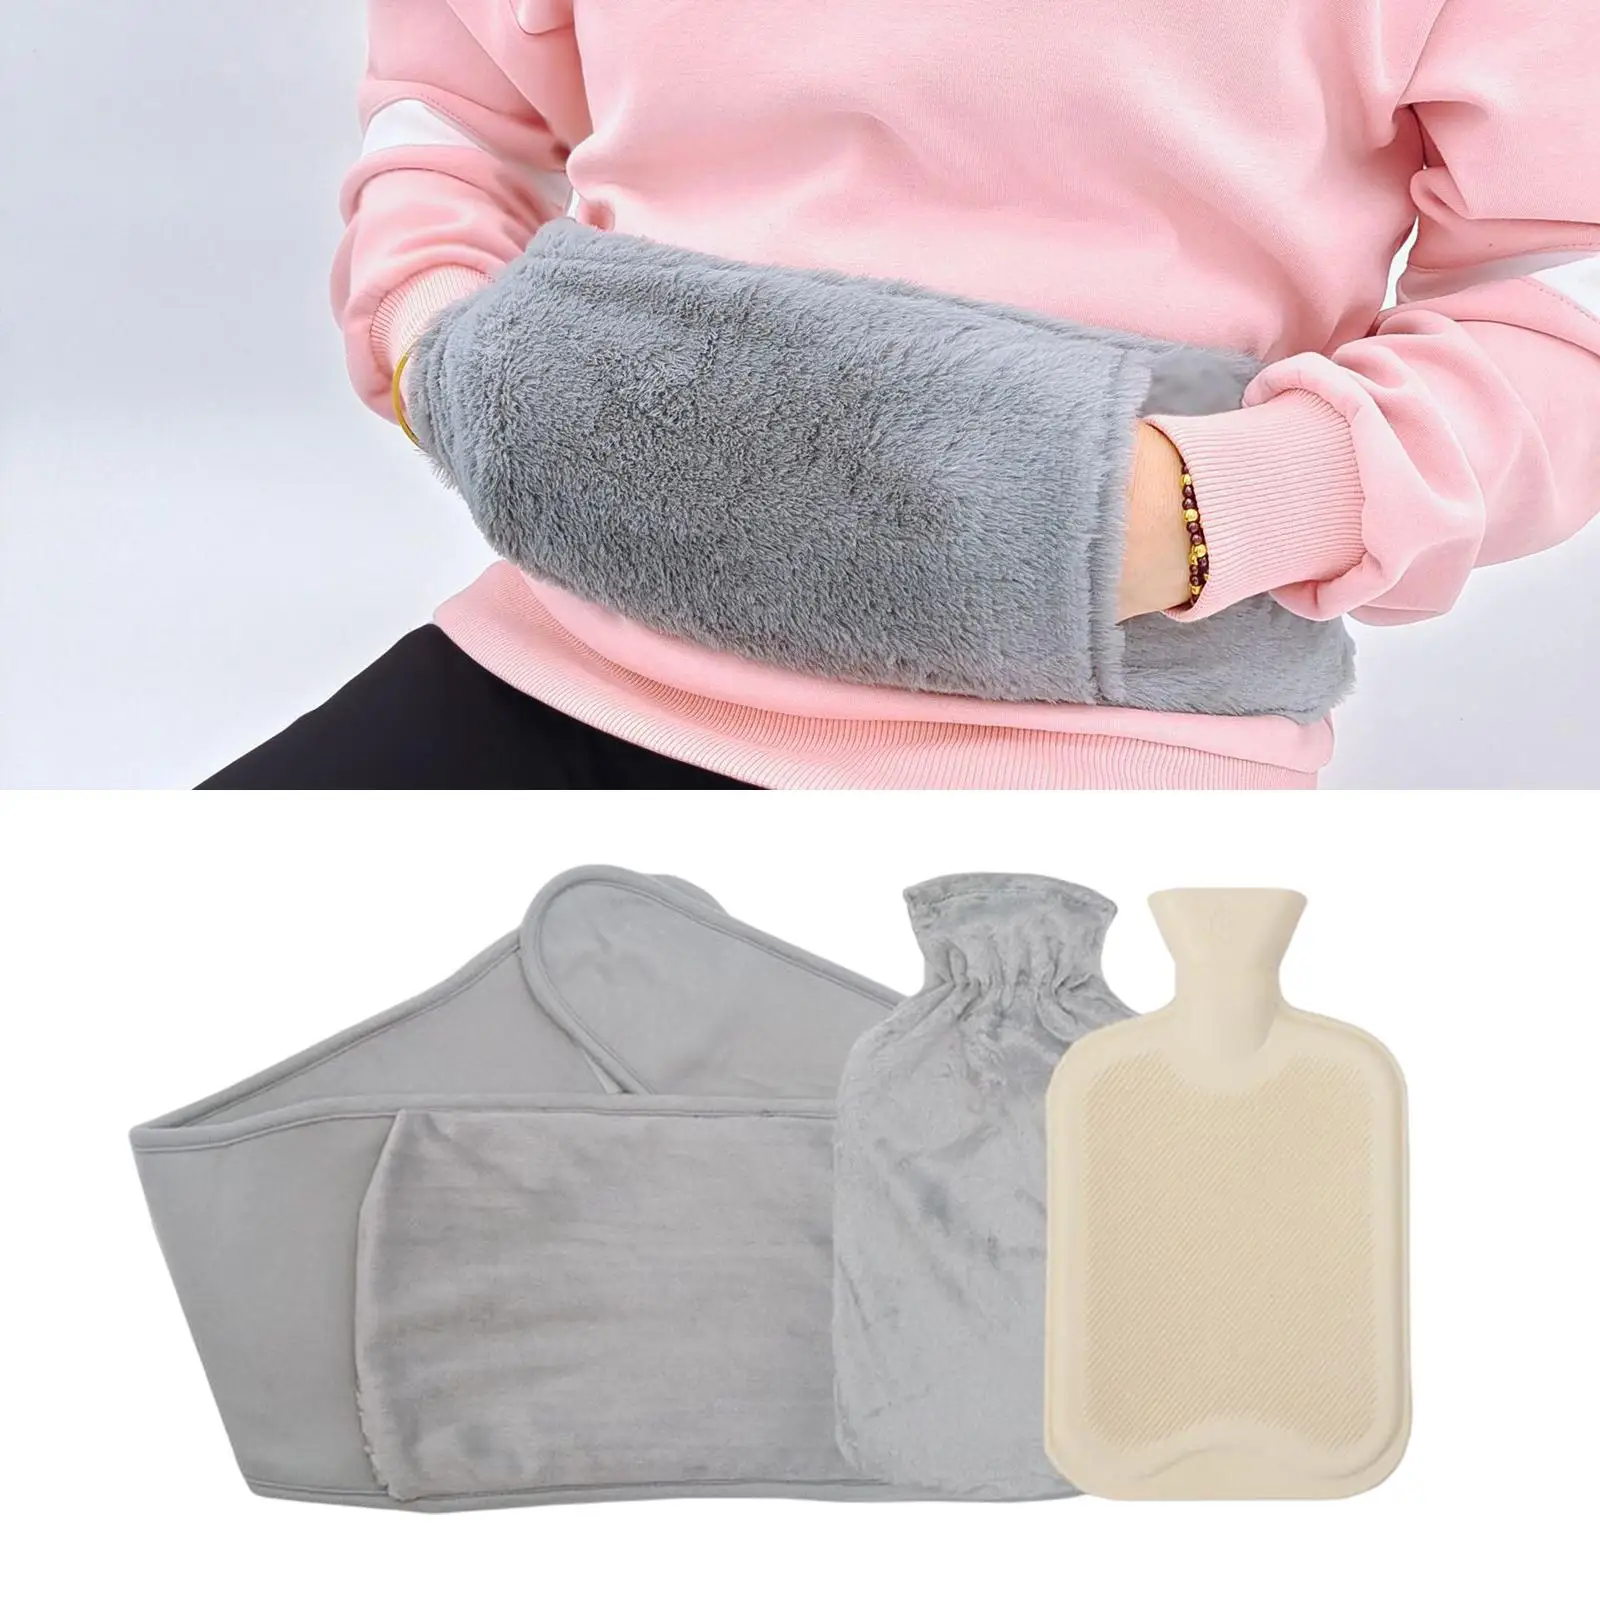 Warm Water Bag Pouch Portable Hands bed Warmer Leakproof for Legs Back